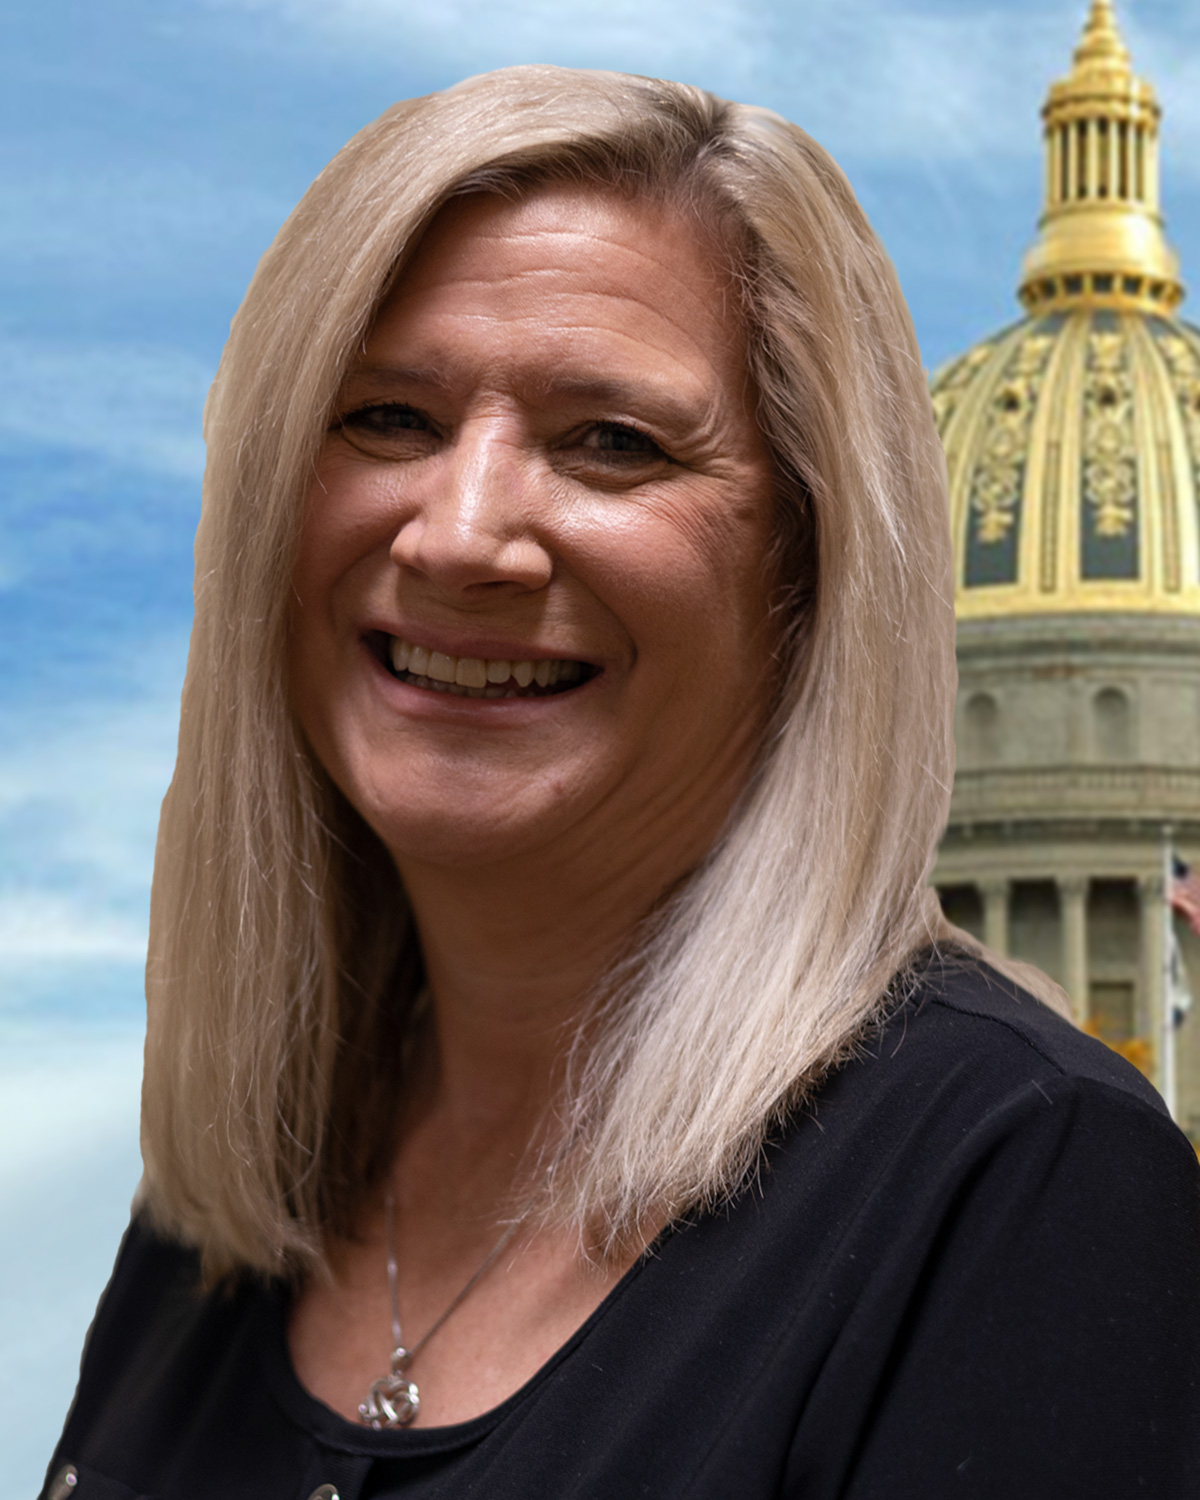 WV SBDC Names Carol Goolsby as New Business Coach for the Eastern Region